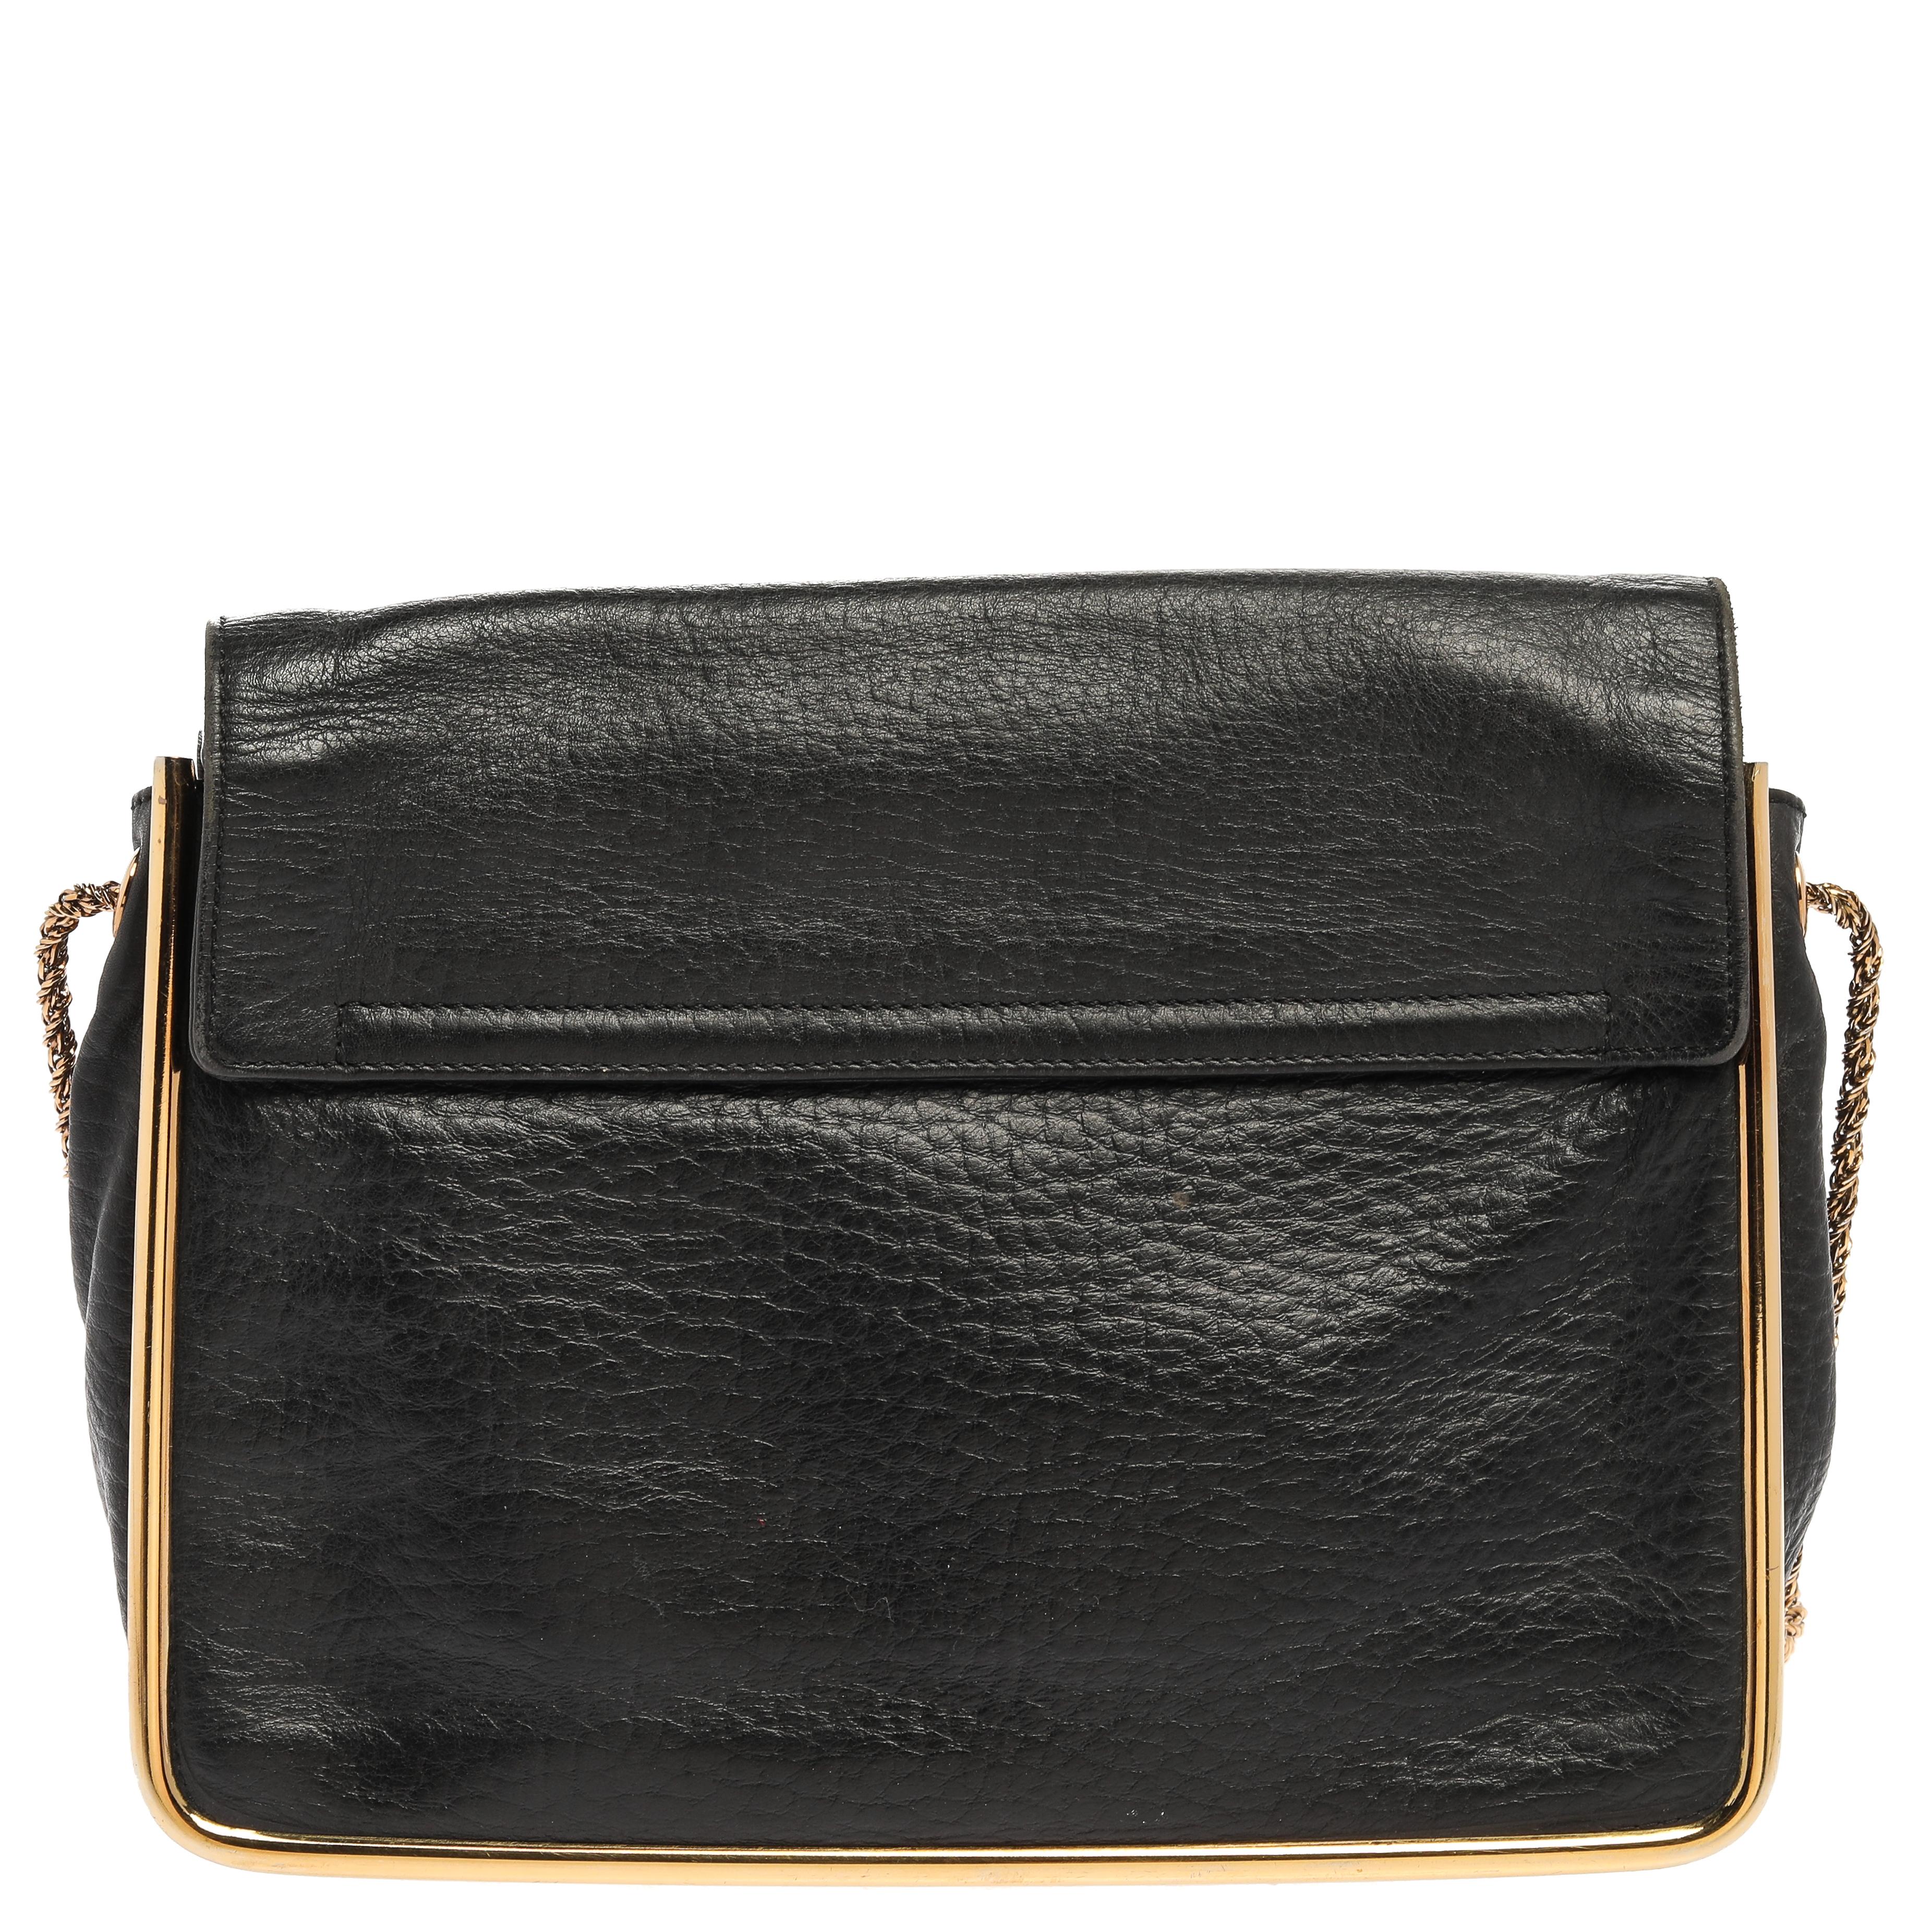 This stylish Sally shoulder bag from Chole is crafted from black leather. The bag features a chain-link strap with leather shoulder rest and a stunning flip-lock in gold-tone. The flap opens to a spacious fabric-lined interior that houses a zip